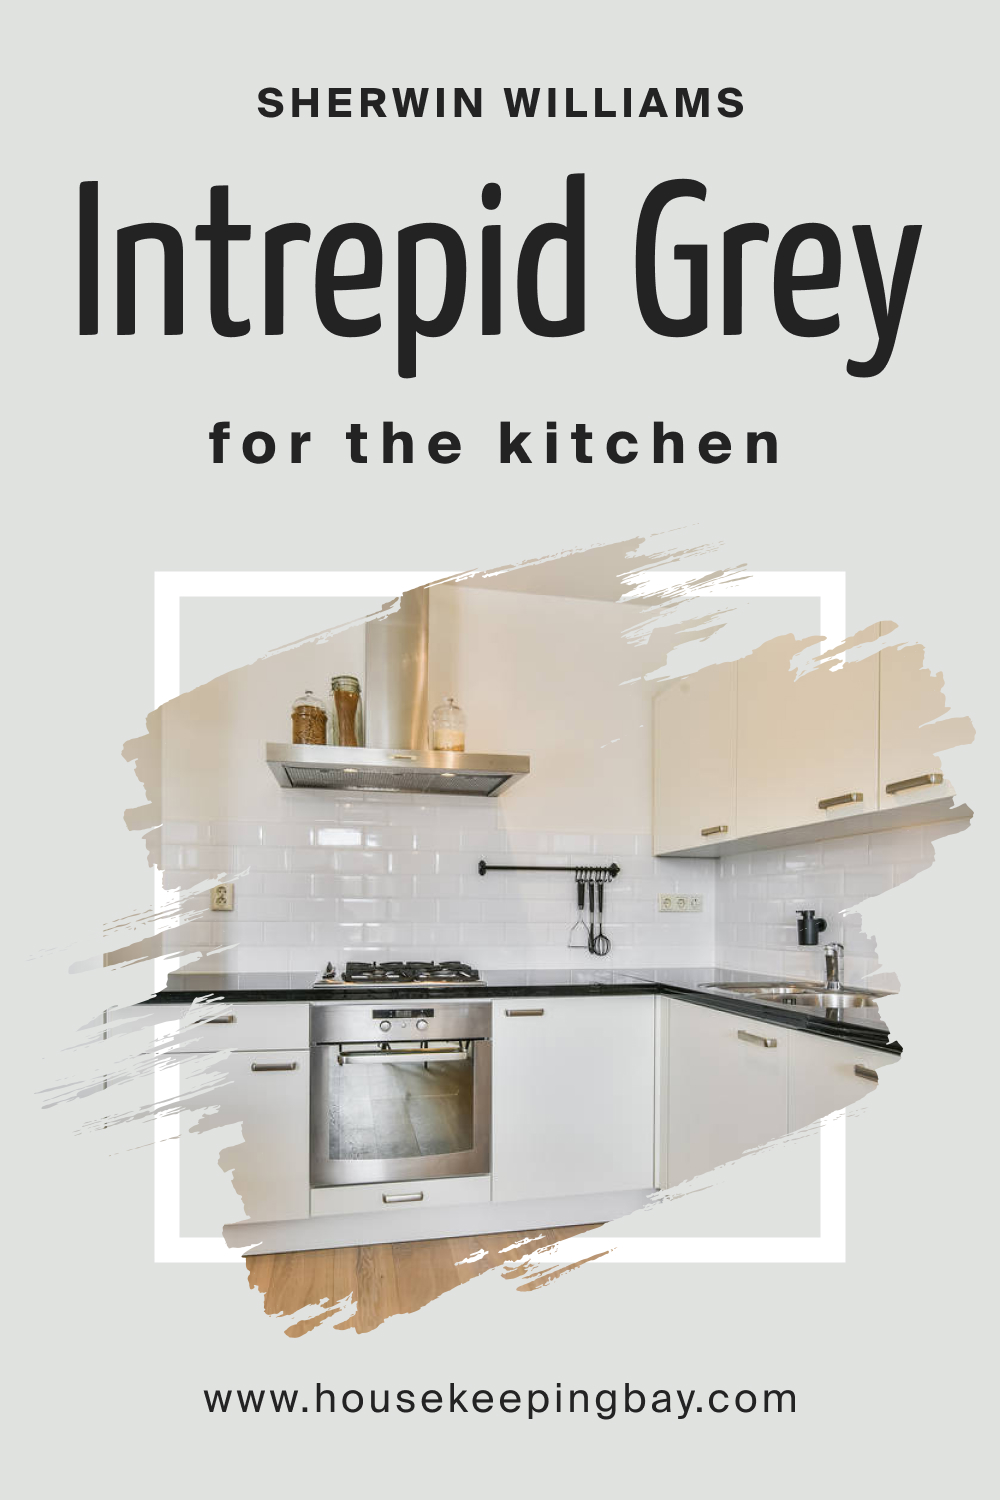 Sherwin Williams. SW 9556 Intrepid Grey For the Kitchens